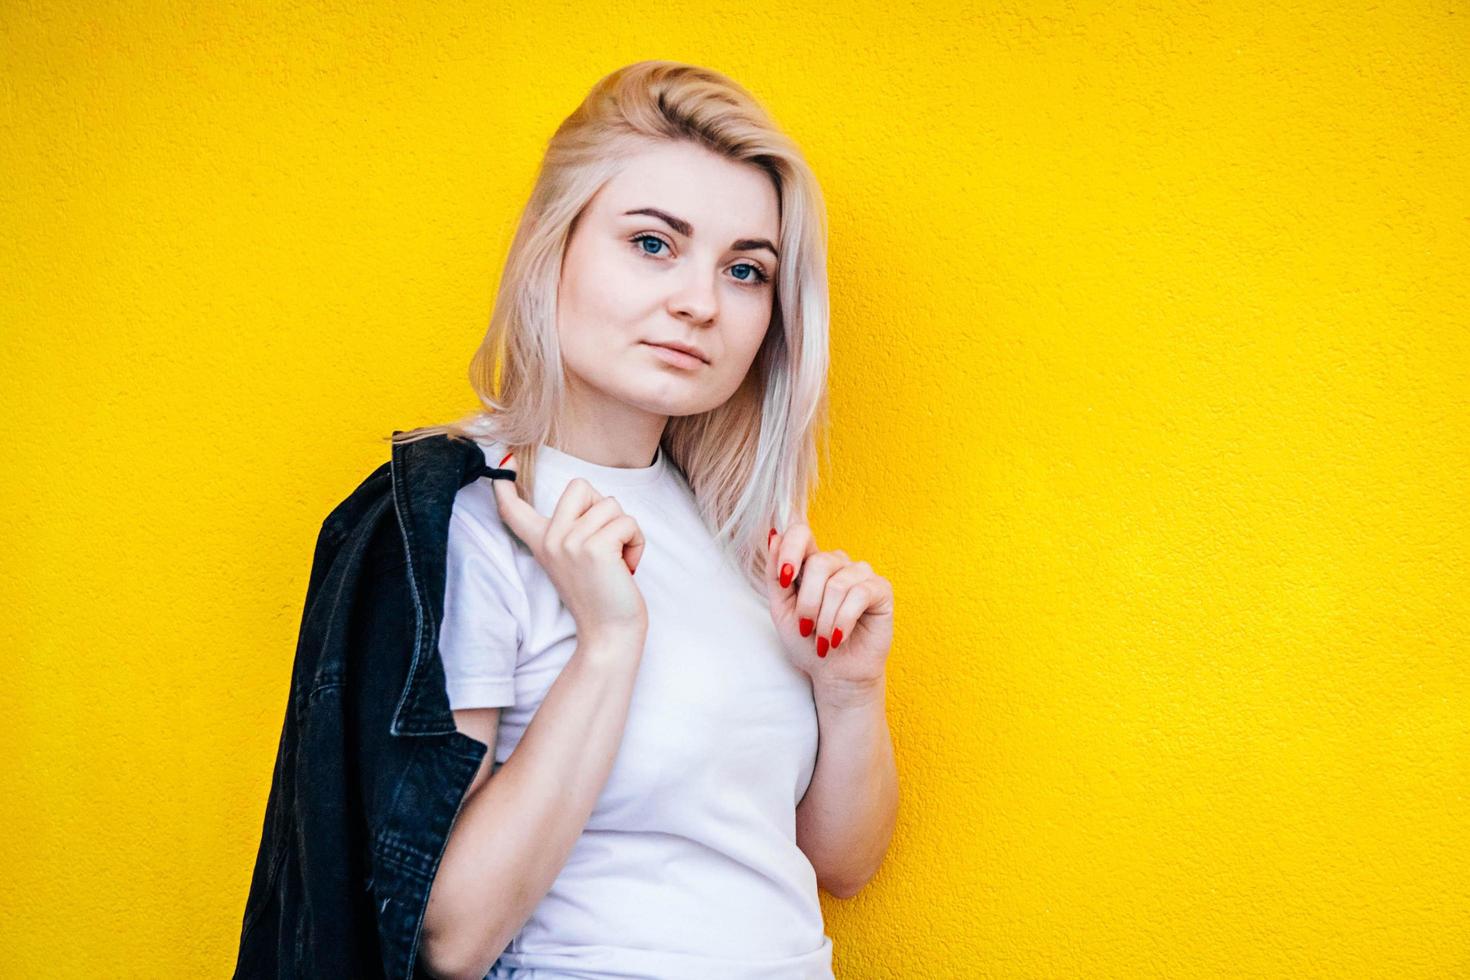 Woman posing against a background of yellow wall photo